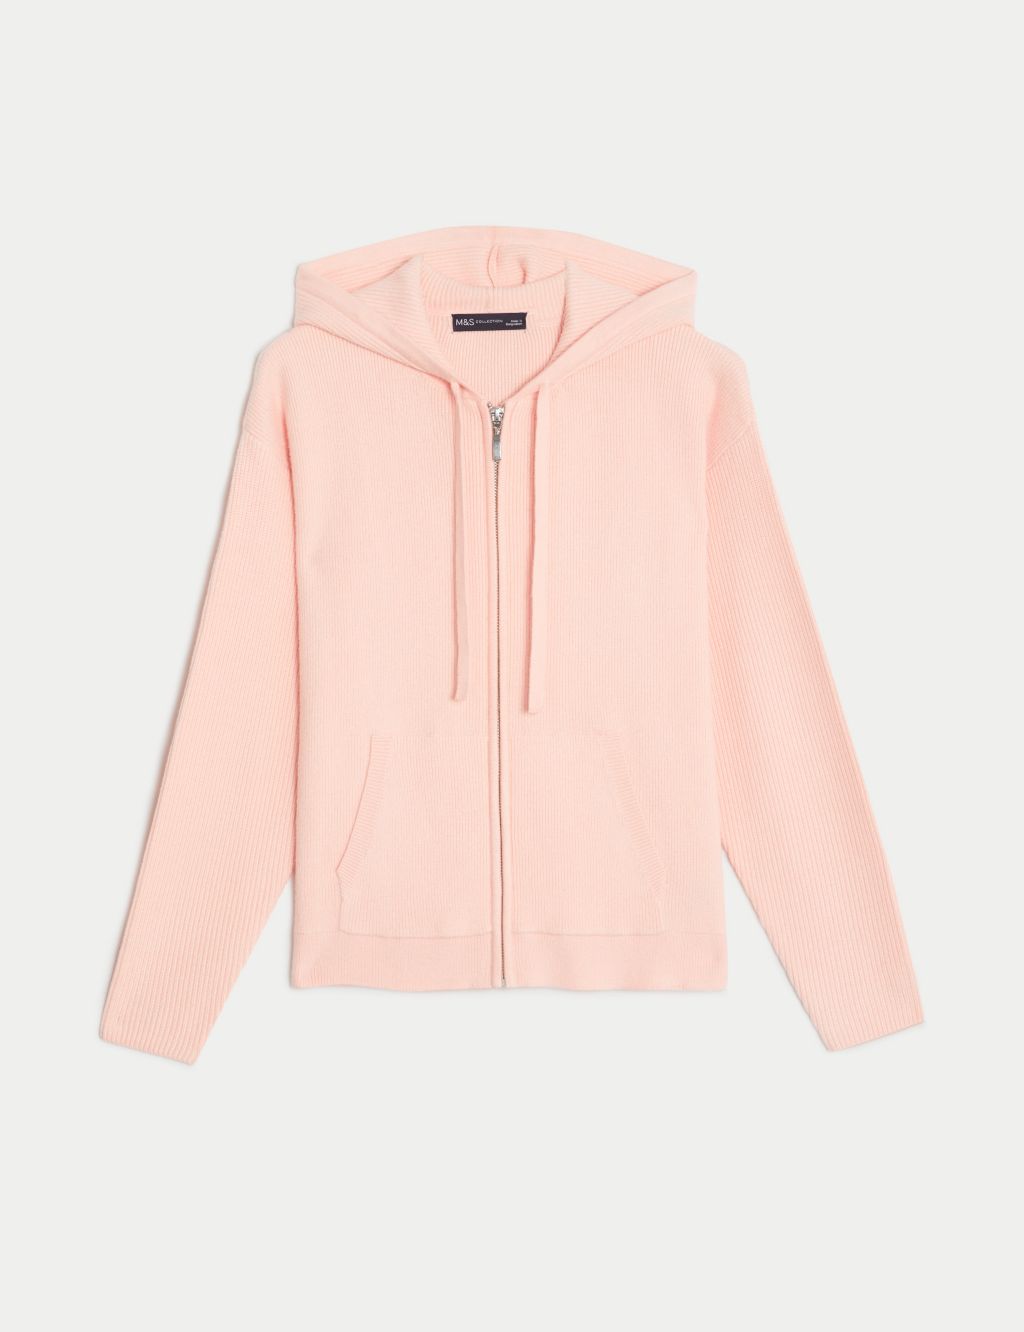 Soft Touch Zip Up Hoodie image 2